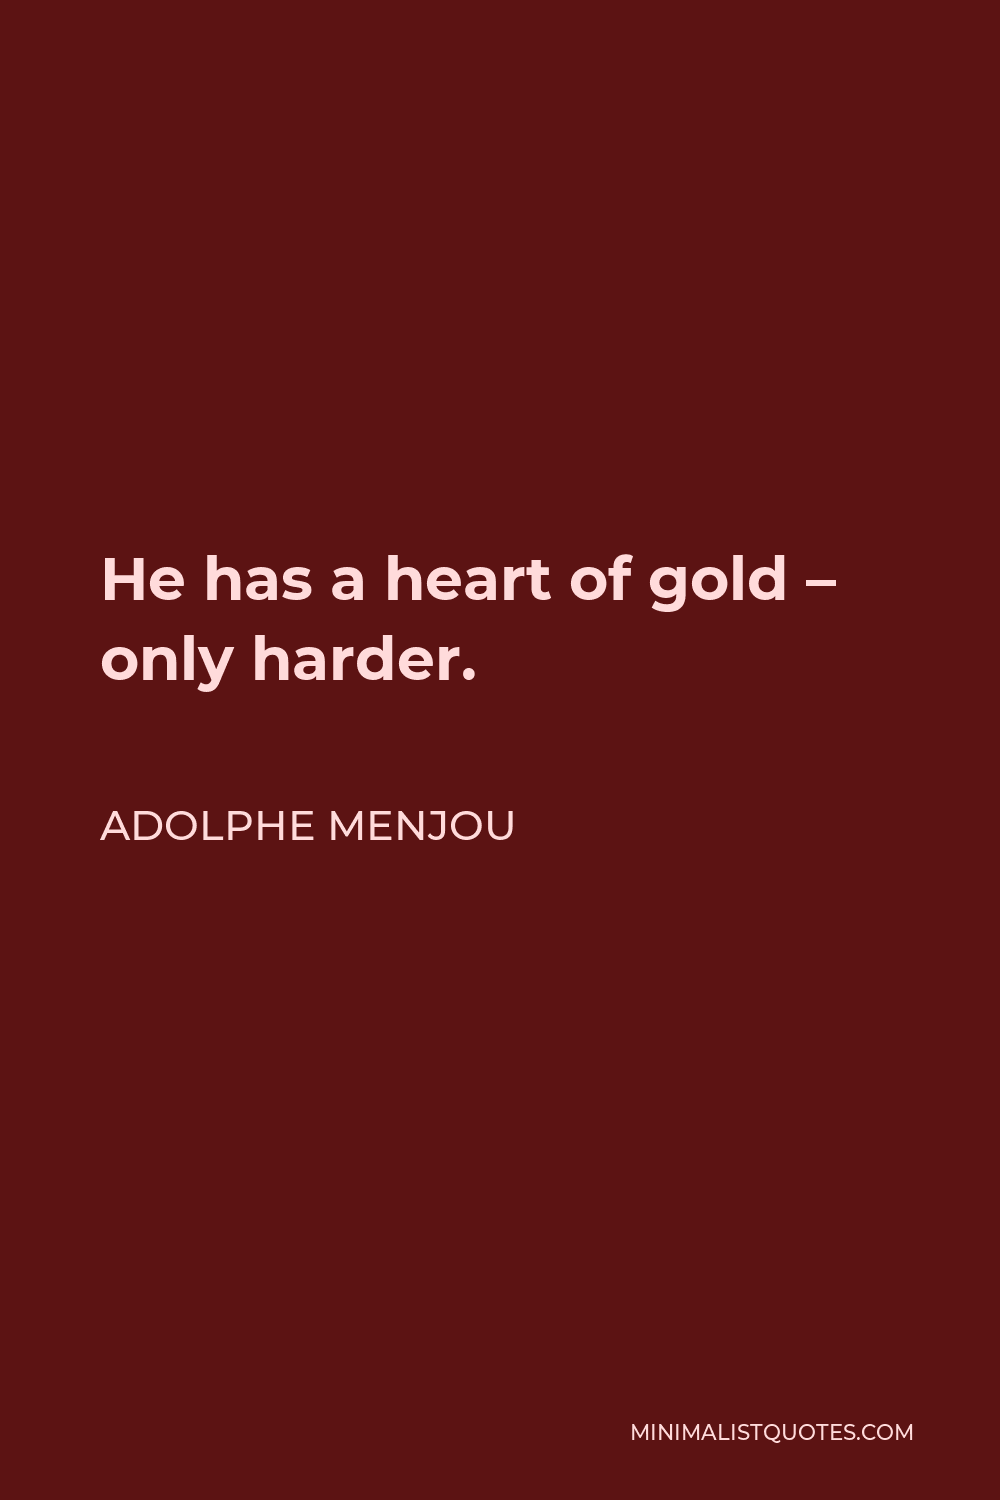 Adolphe Menjou Quote - He has a heart of gold – only harder.